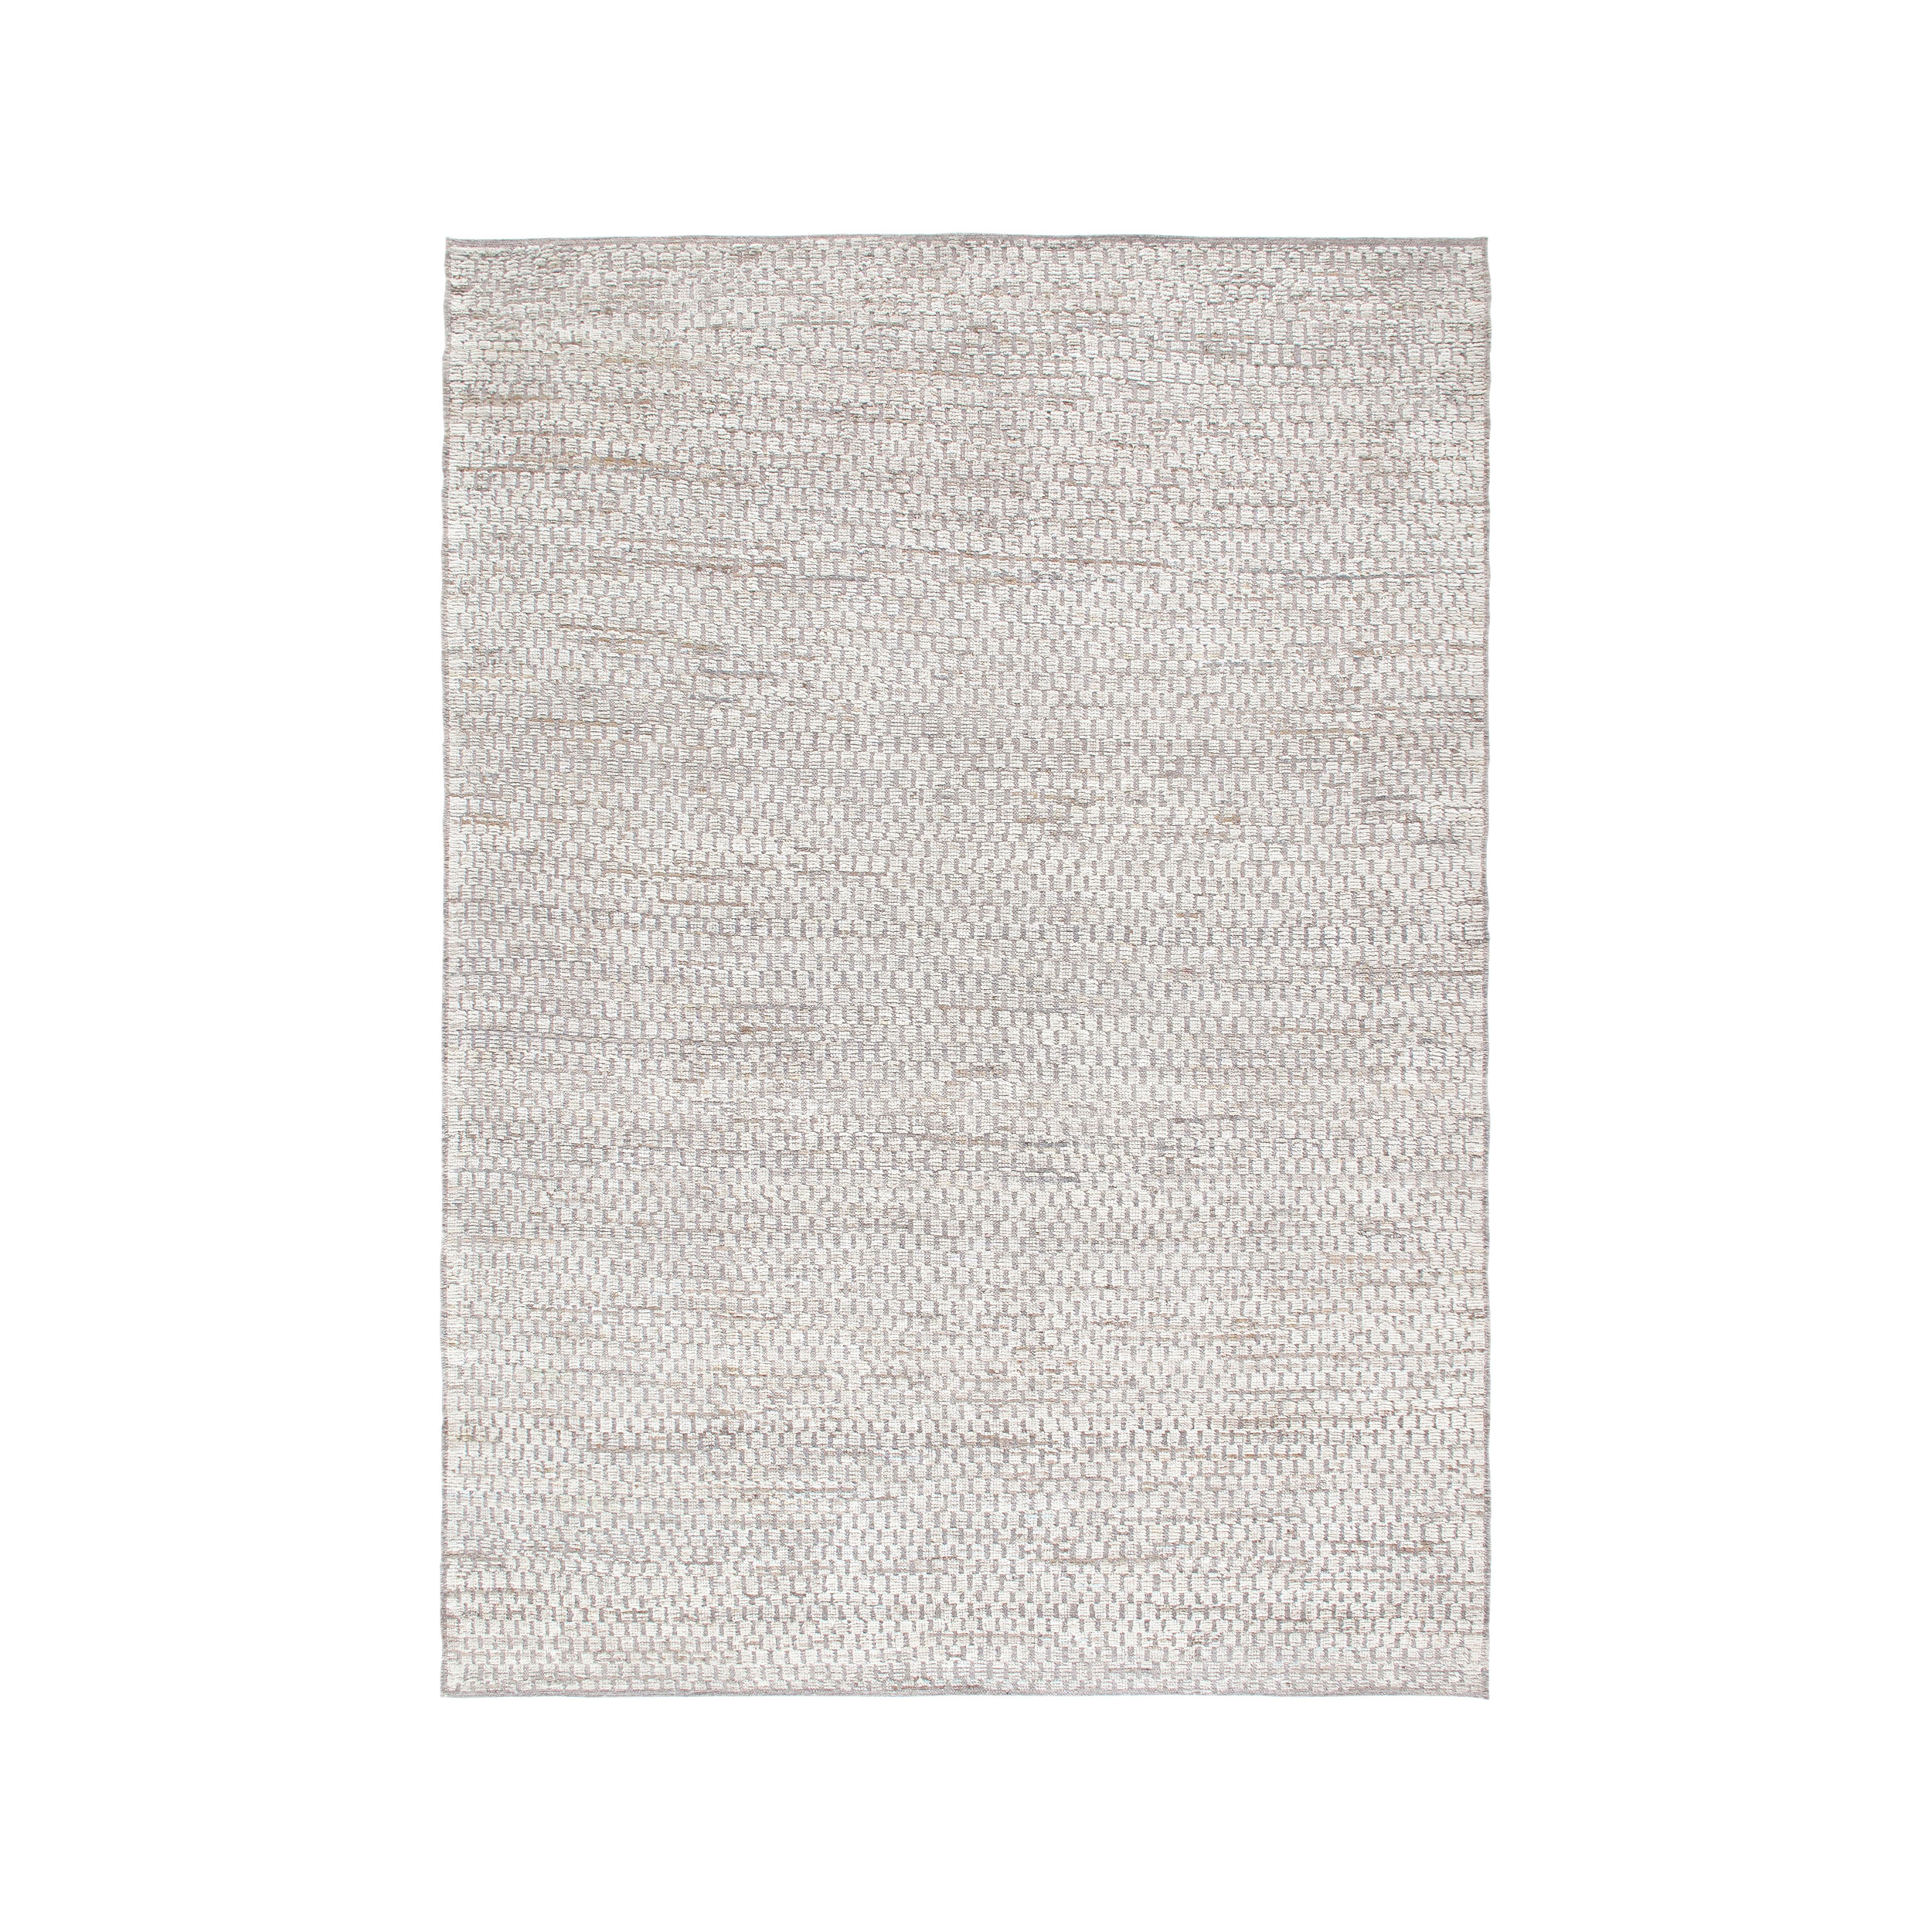 This Pashmina Rug is hand-knotted and made of 100% wool.